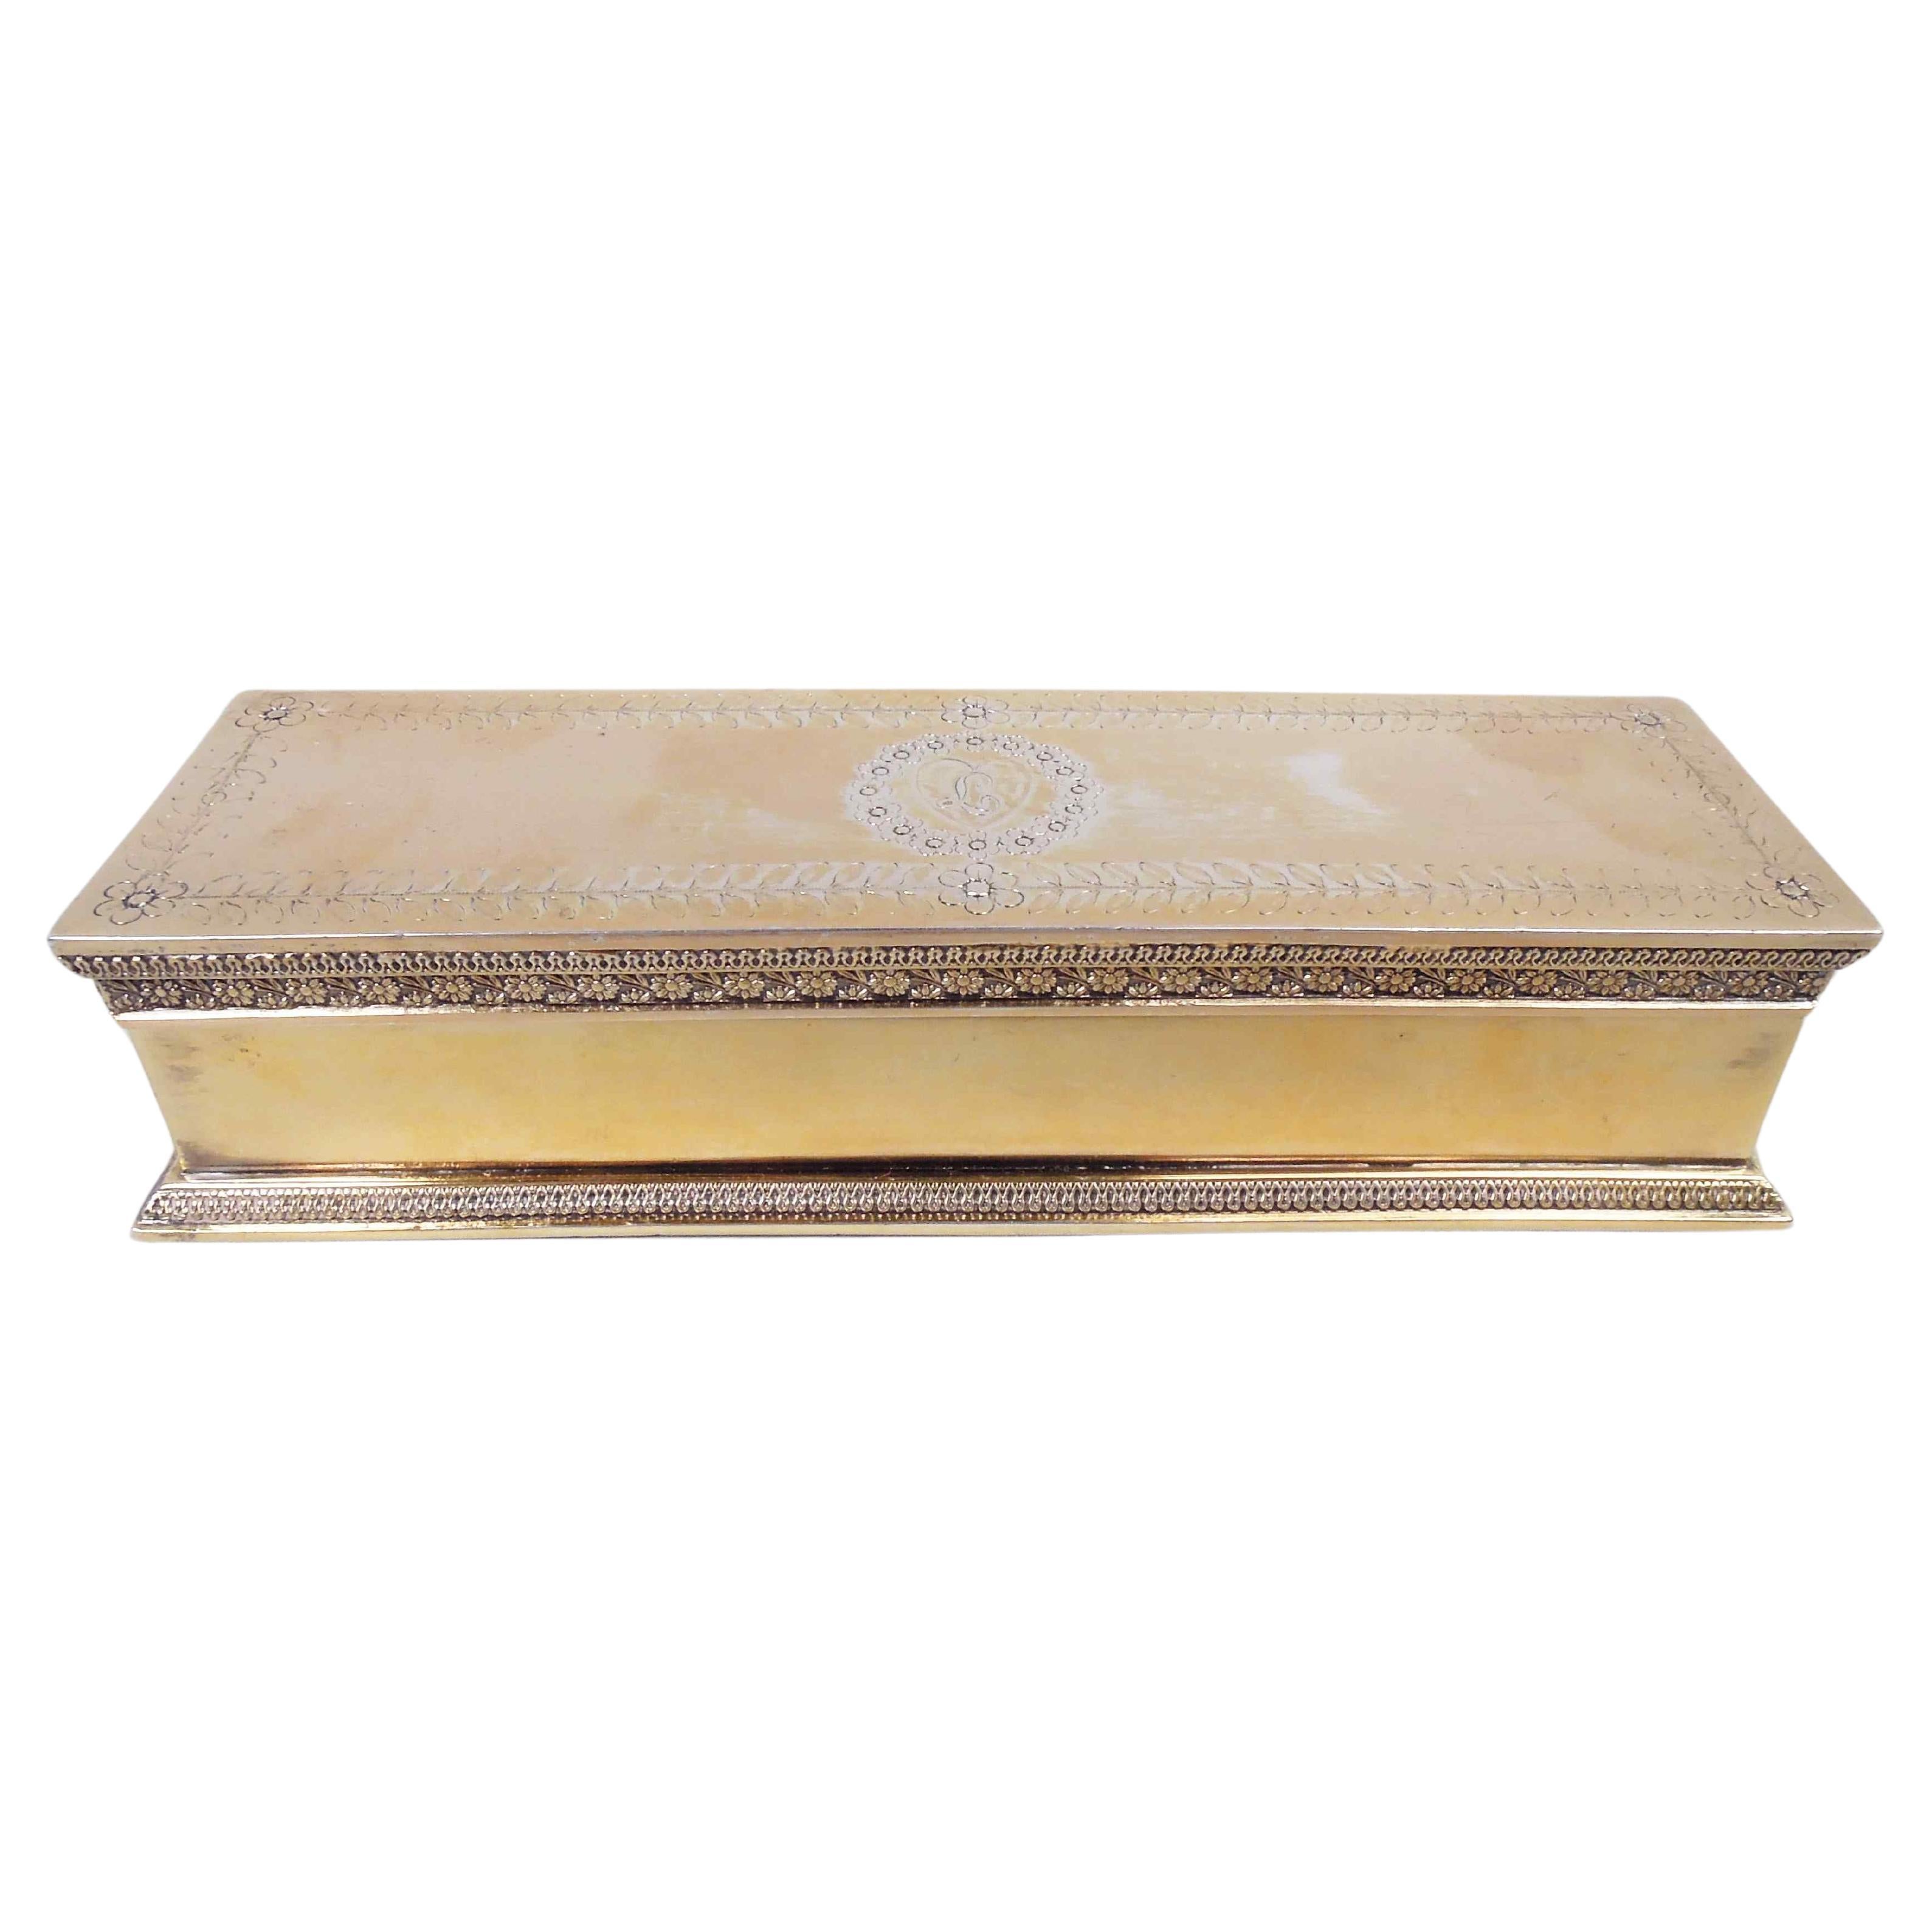 Odiot French Restauration Return of the Bourbons Silver Gilt Box For Sale